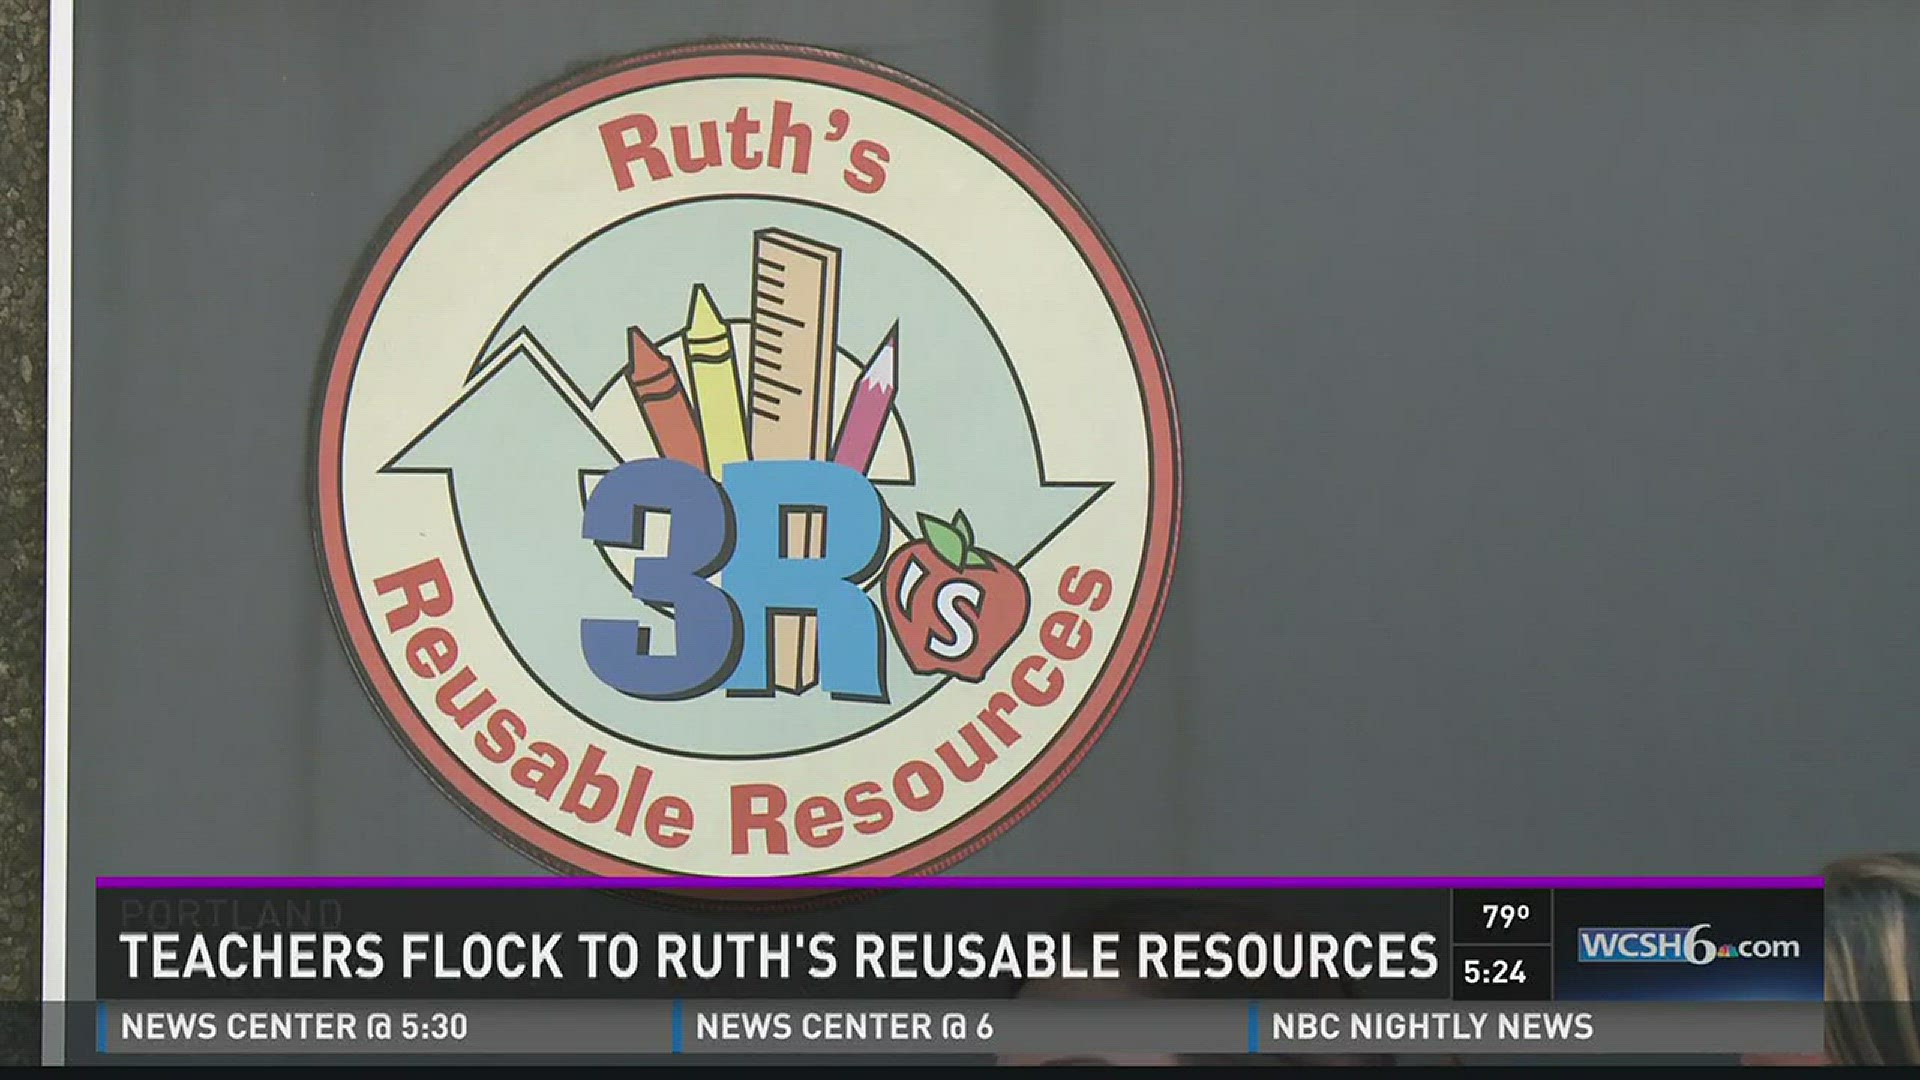 Teachers flock to Ruth's Reusable Resources